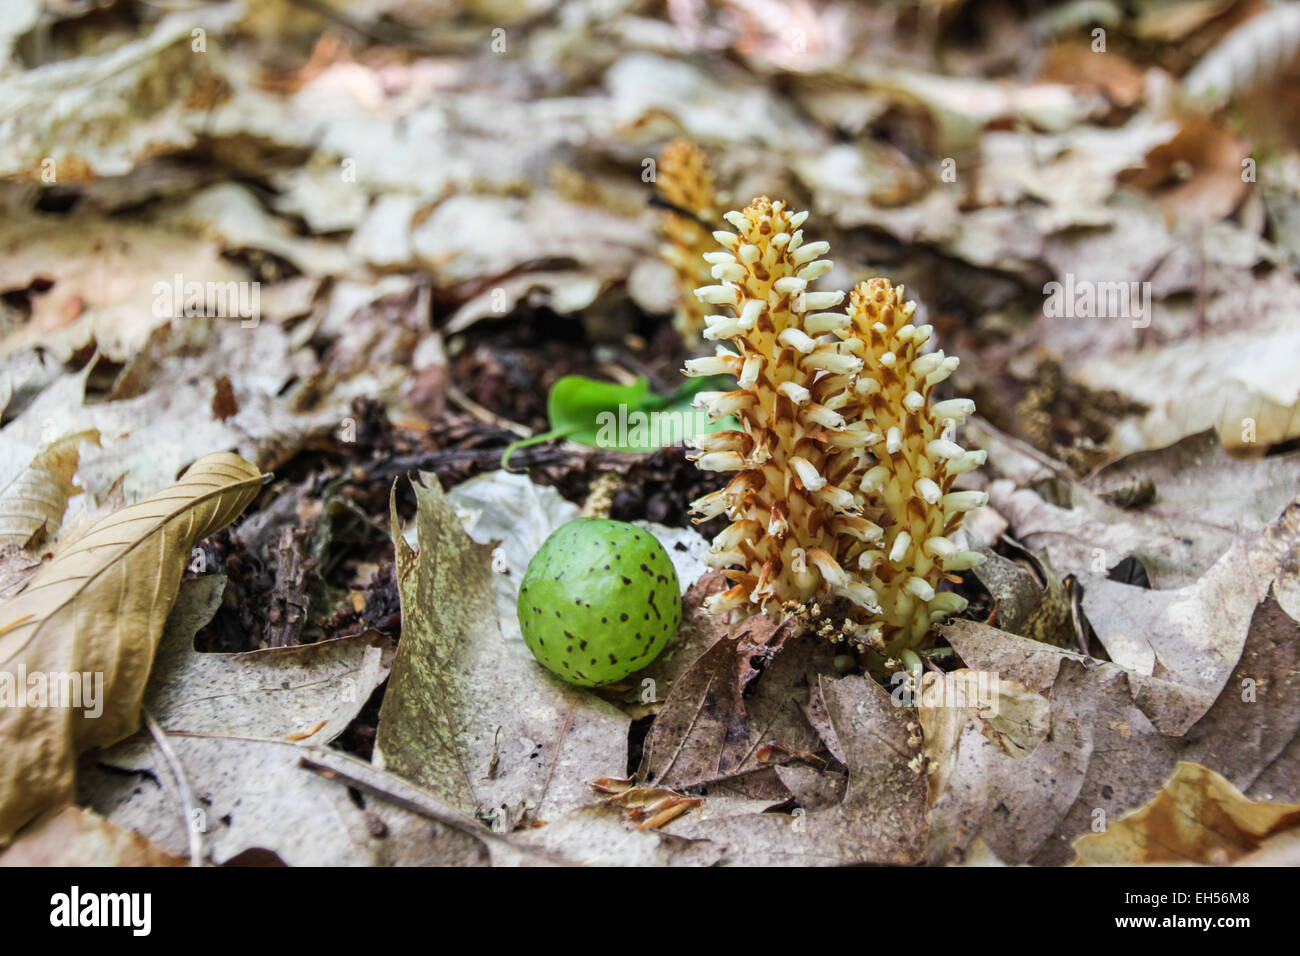 The Squawroot is an odd, parasitic plant. Stock Photo